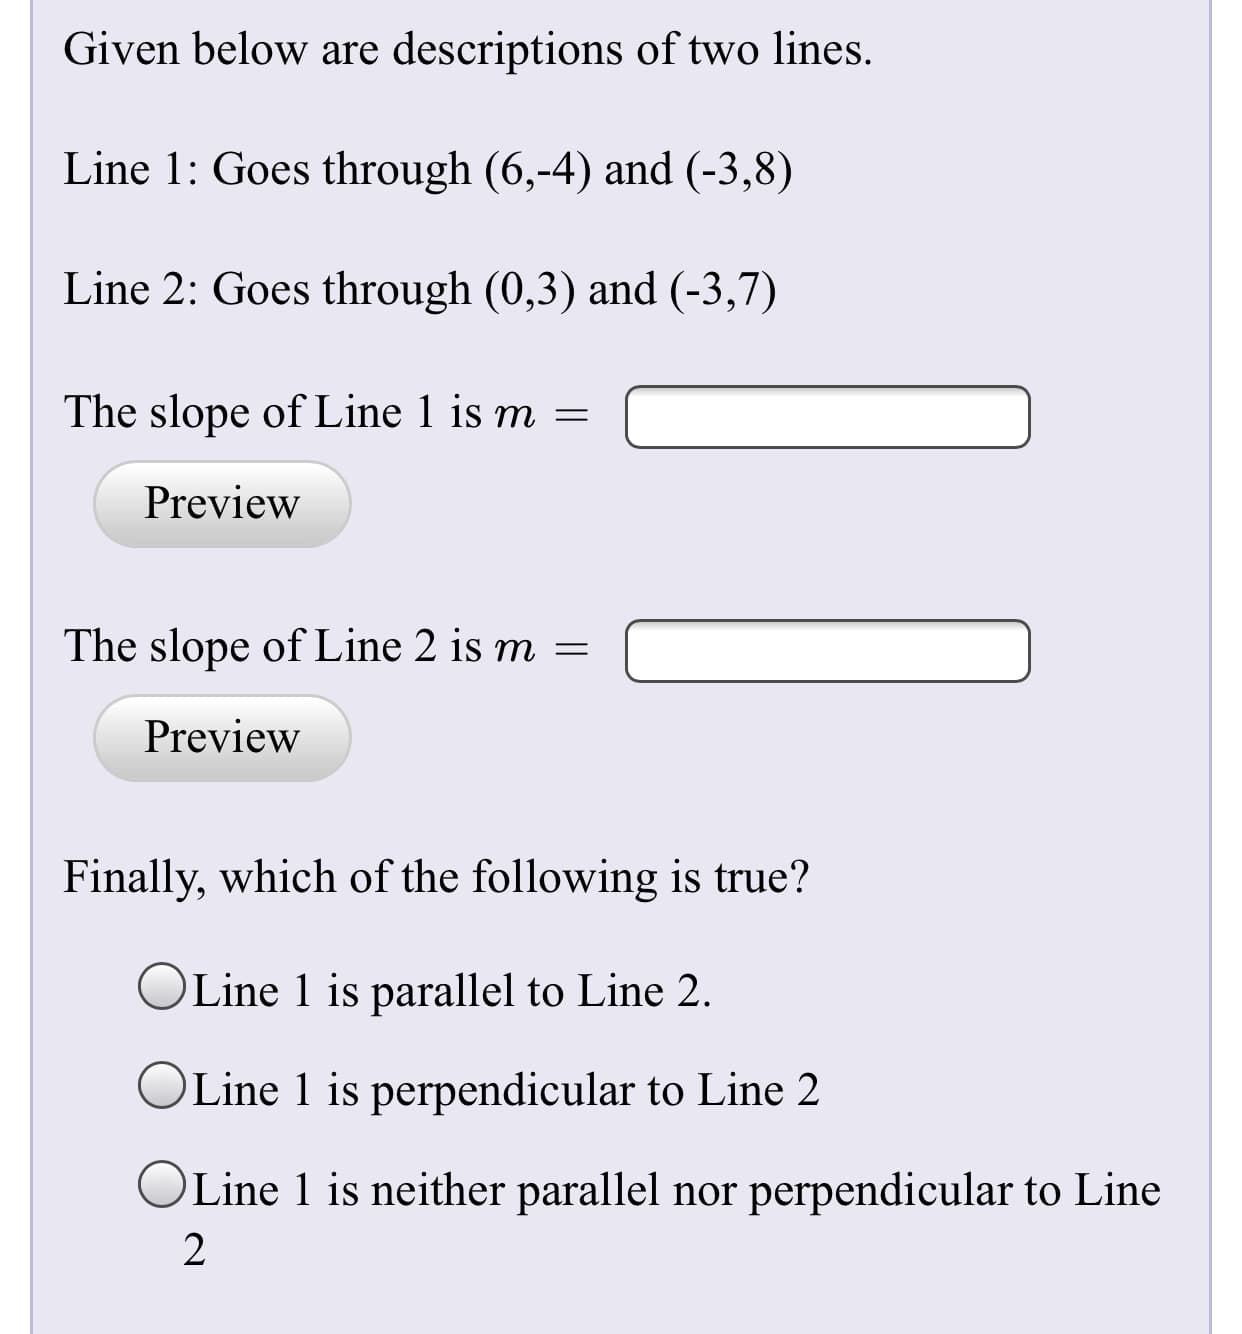 Given below are descriptions of two lines.
Line 1: Goes through (6,-4) and (-3,8)
Line 2: Goes through (0,3) and (-3,7)
The slope of Line 1 is m =
Preview
The slope of Line 2 is m =
Preview
Finally, which of the following is true?
Line 1 is parallel to Line 2.
OLine 1 is perpendicular to Line 2
OLine 1 is neither parallel nor perpendicular to Line
